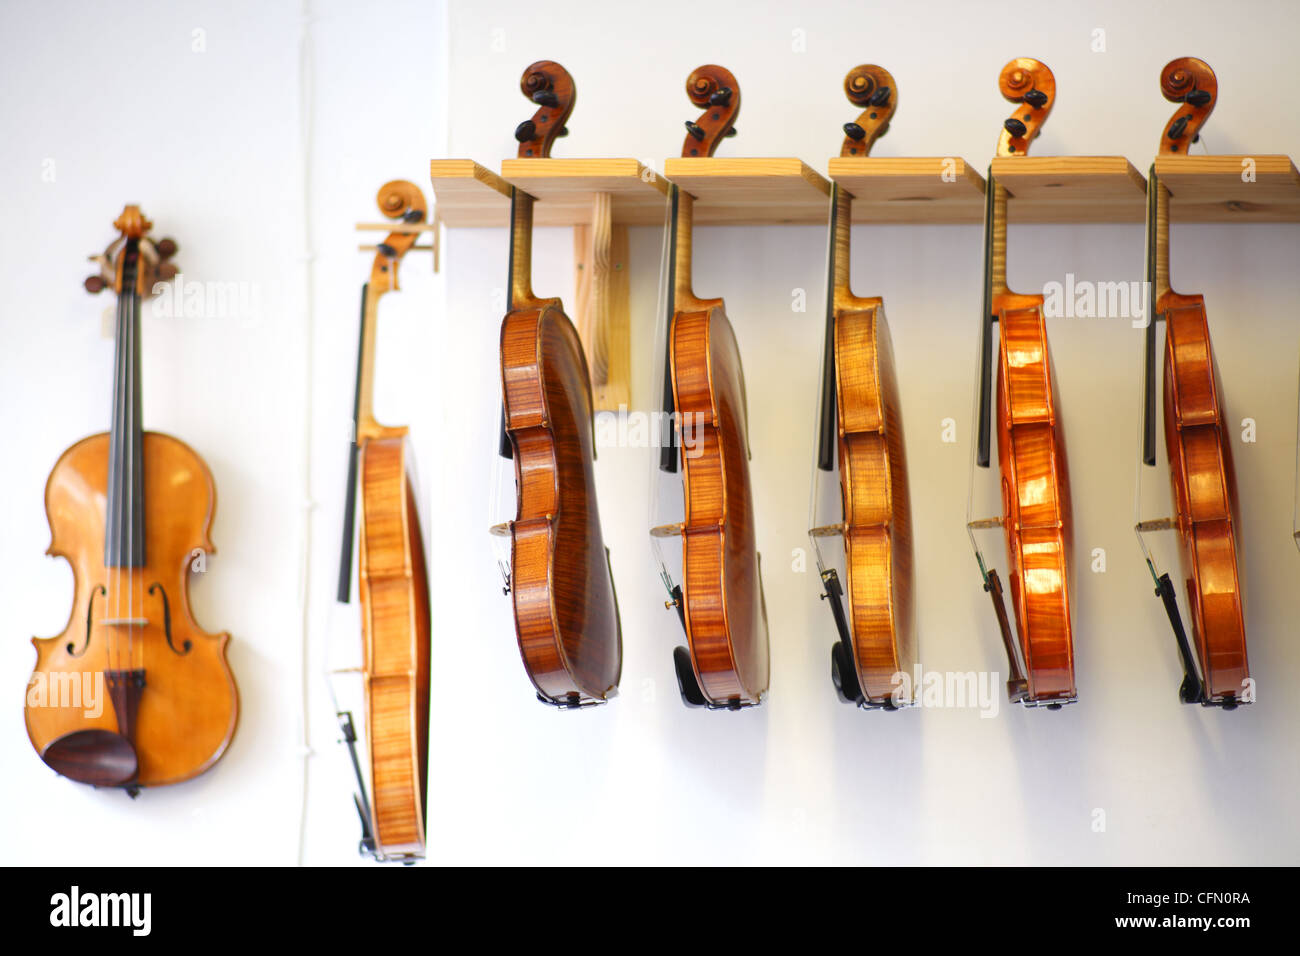 Violins on sale in a music shop. Stock Photo